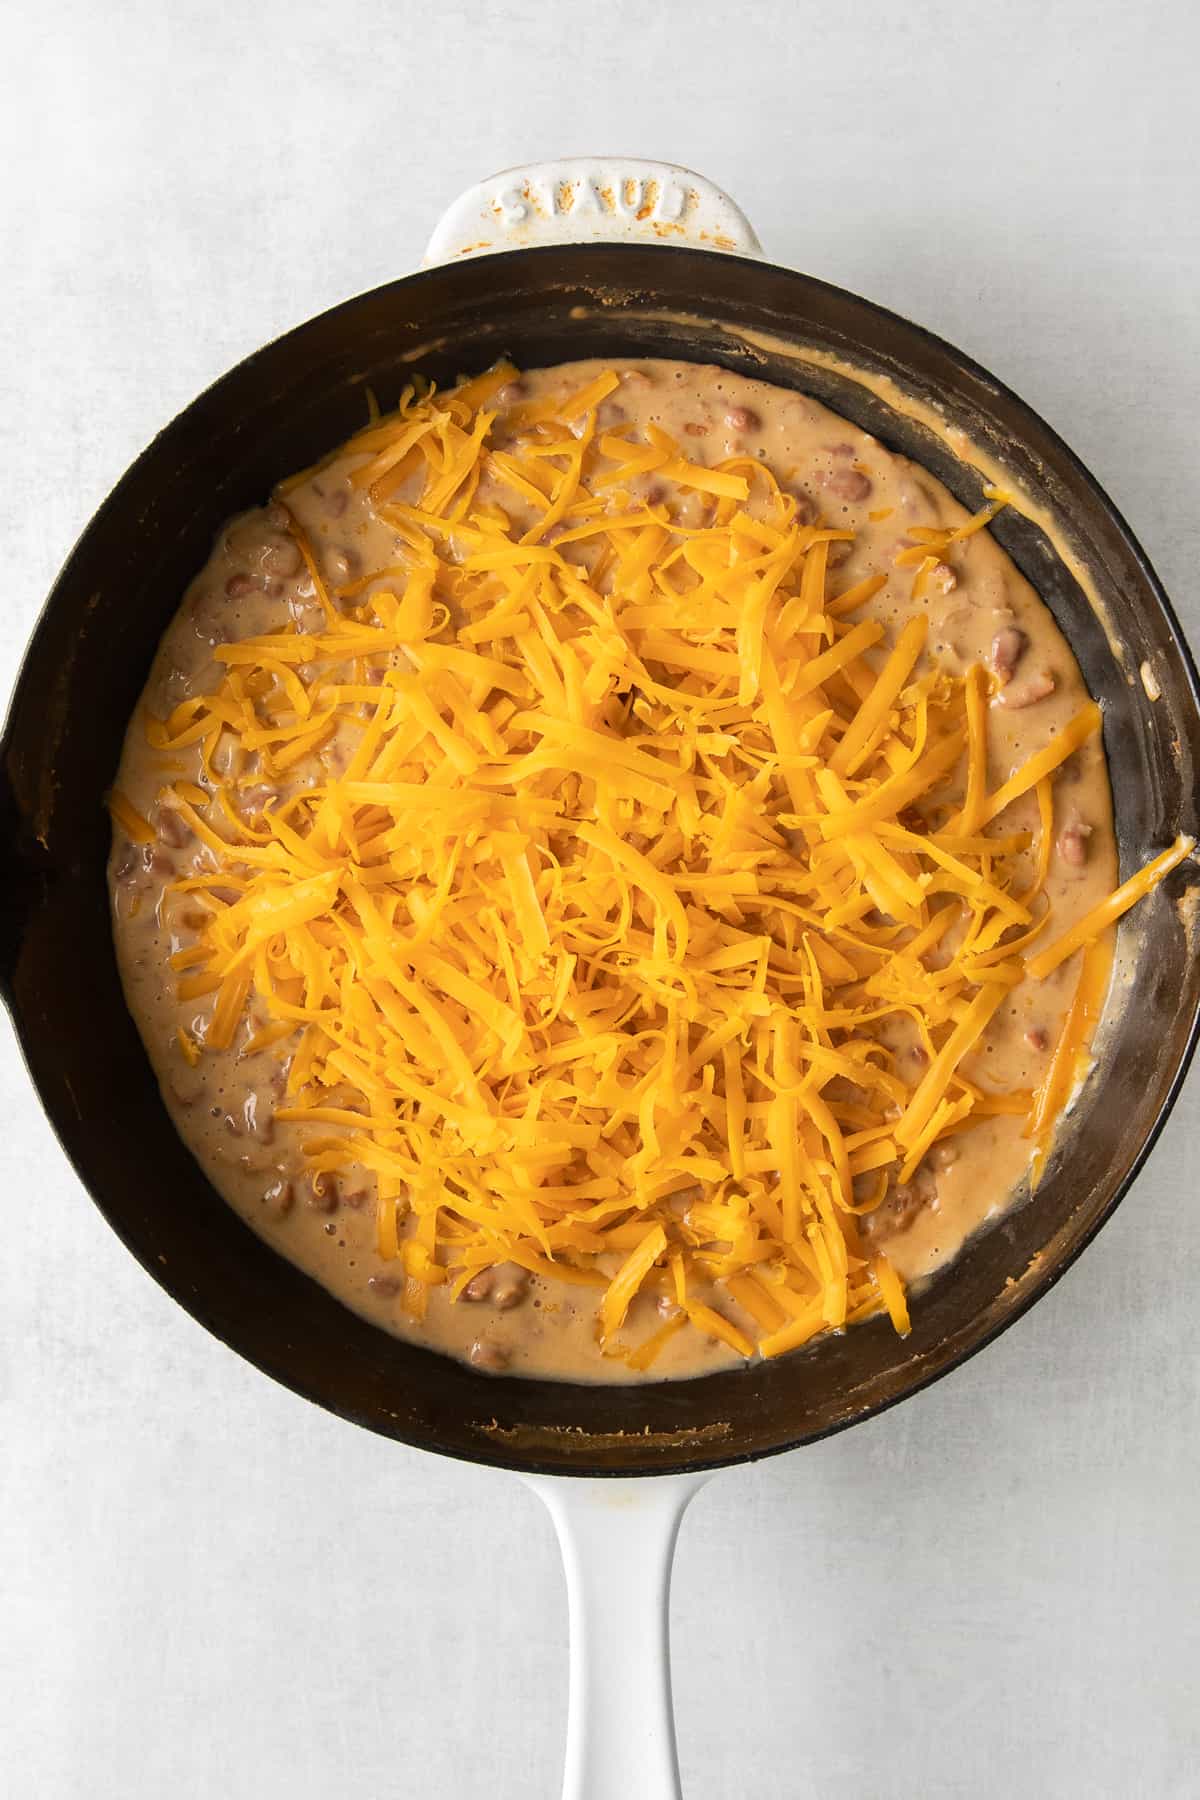 Bean dip topped with shredded cheddar cheese in a cast iron skillet.